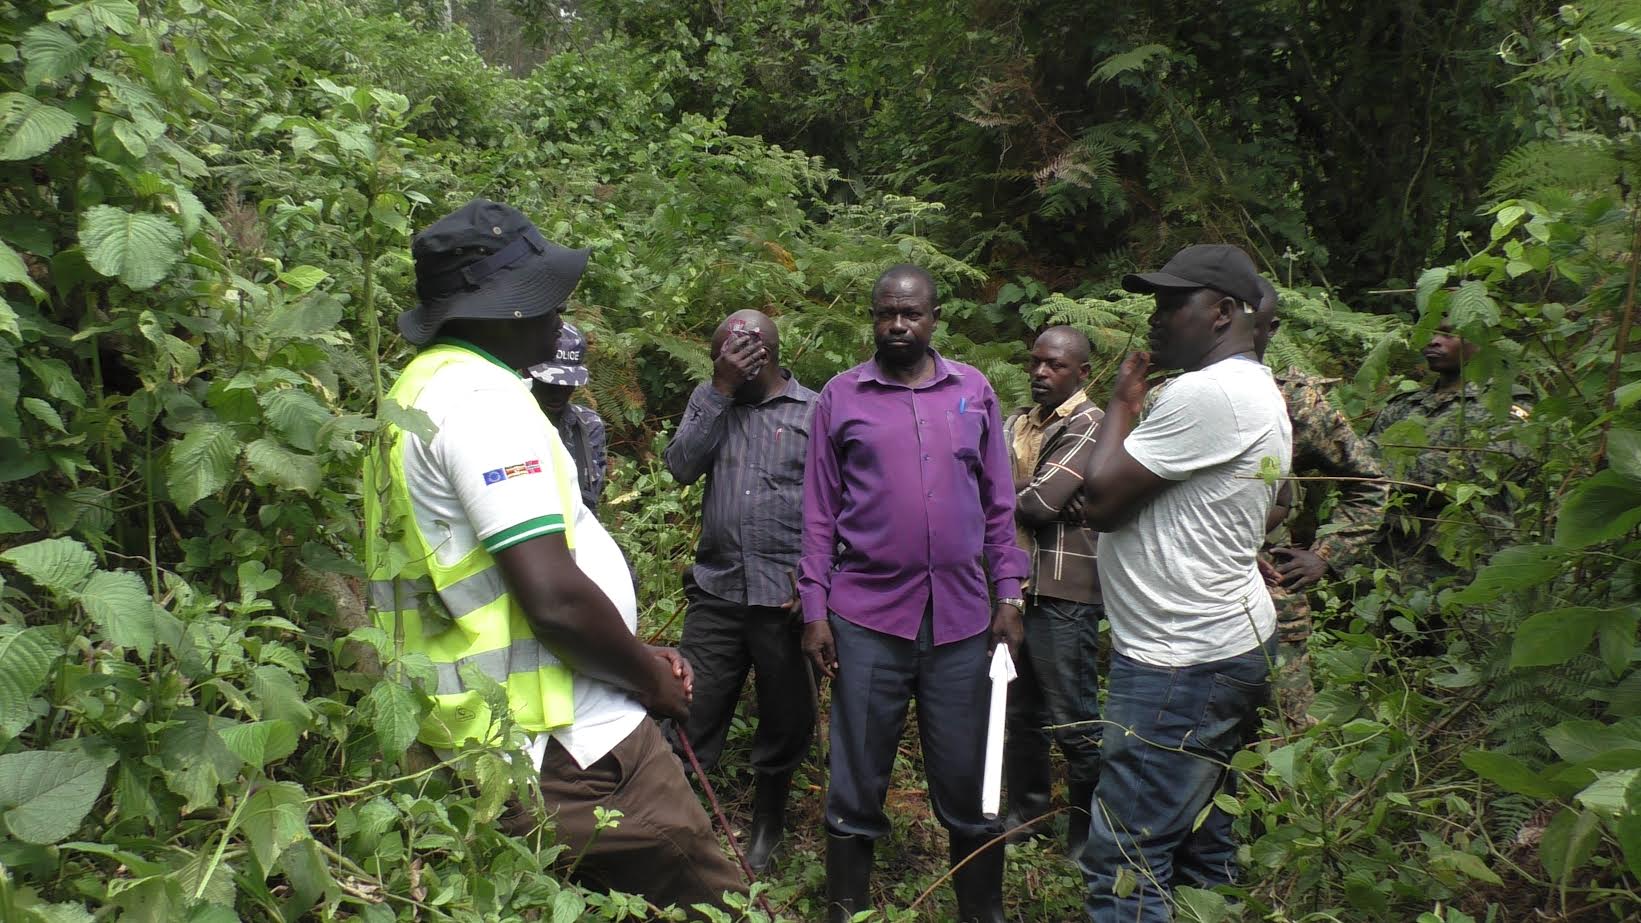 Bugoma forest: Gov’t remains mute over release of survey report as destruction continues